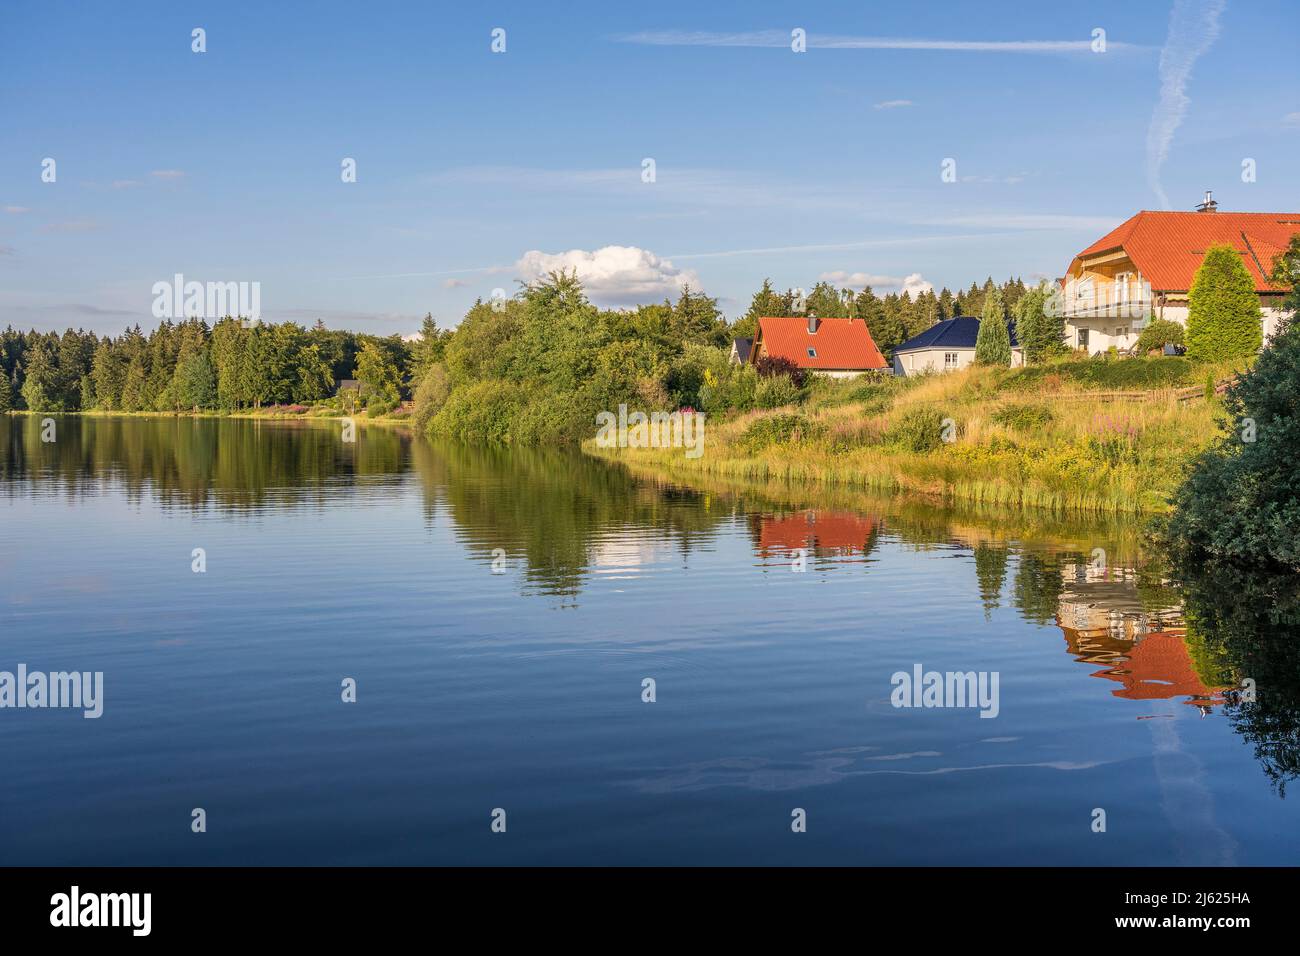 Germany, Lower Saxony, Clausthal-Zellerfeld, Houses on shore of Oberer Hausherzberger Teich Stock Photo